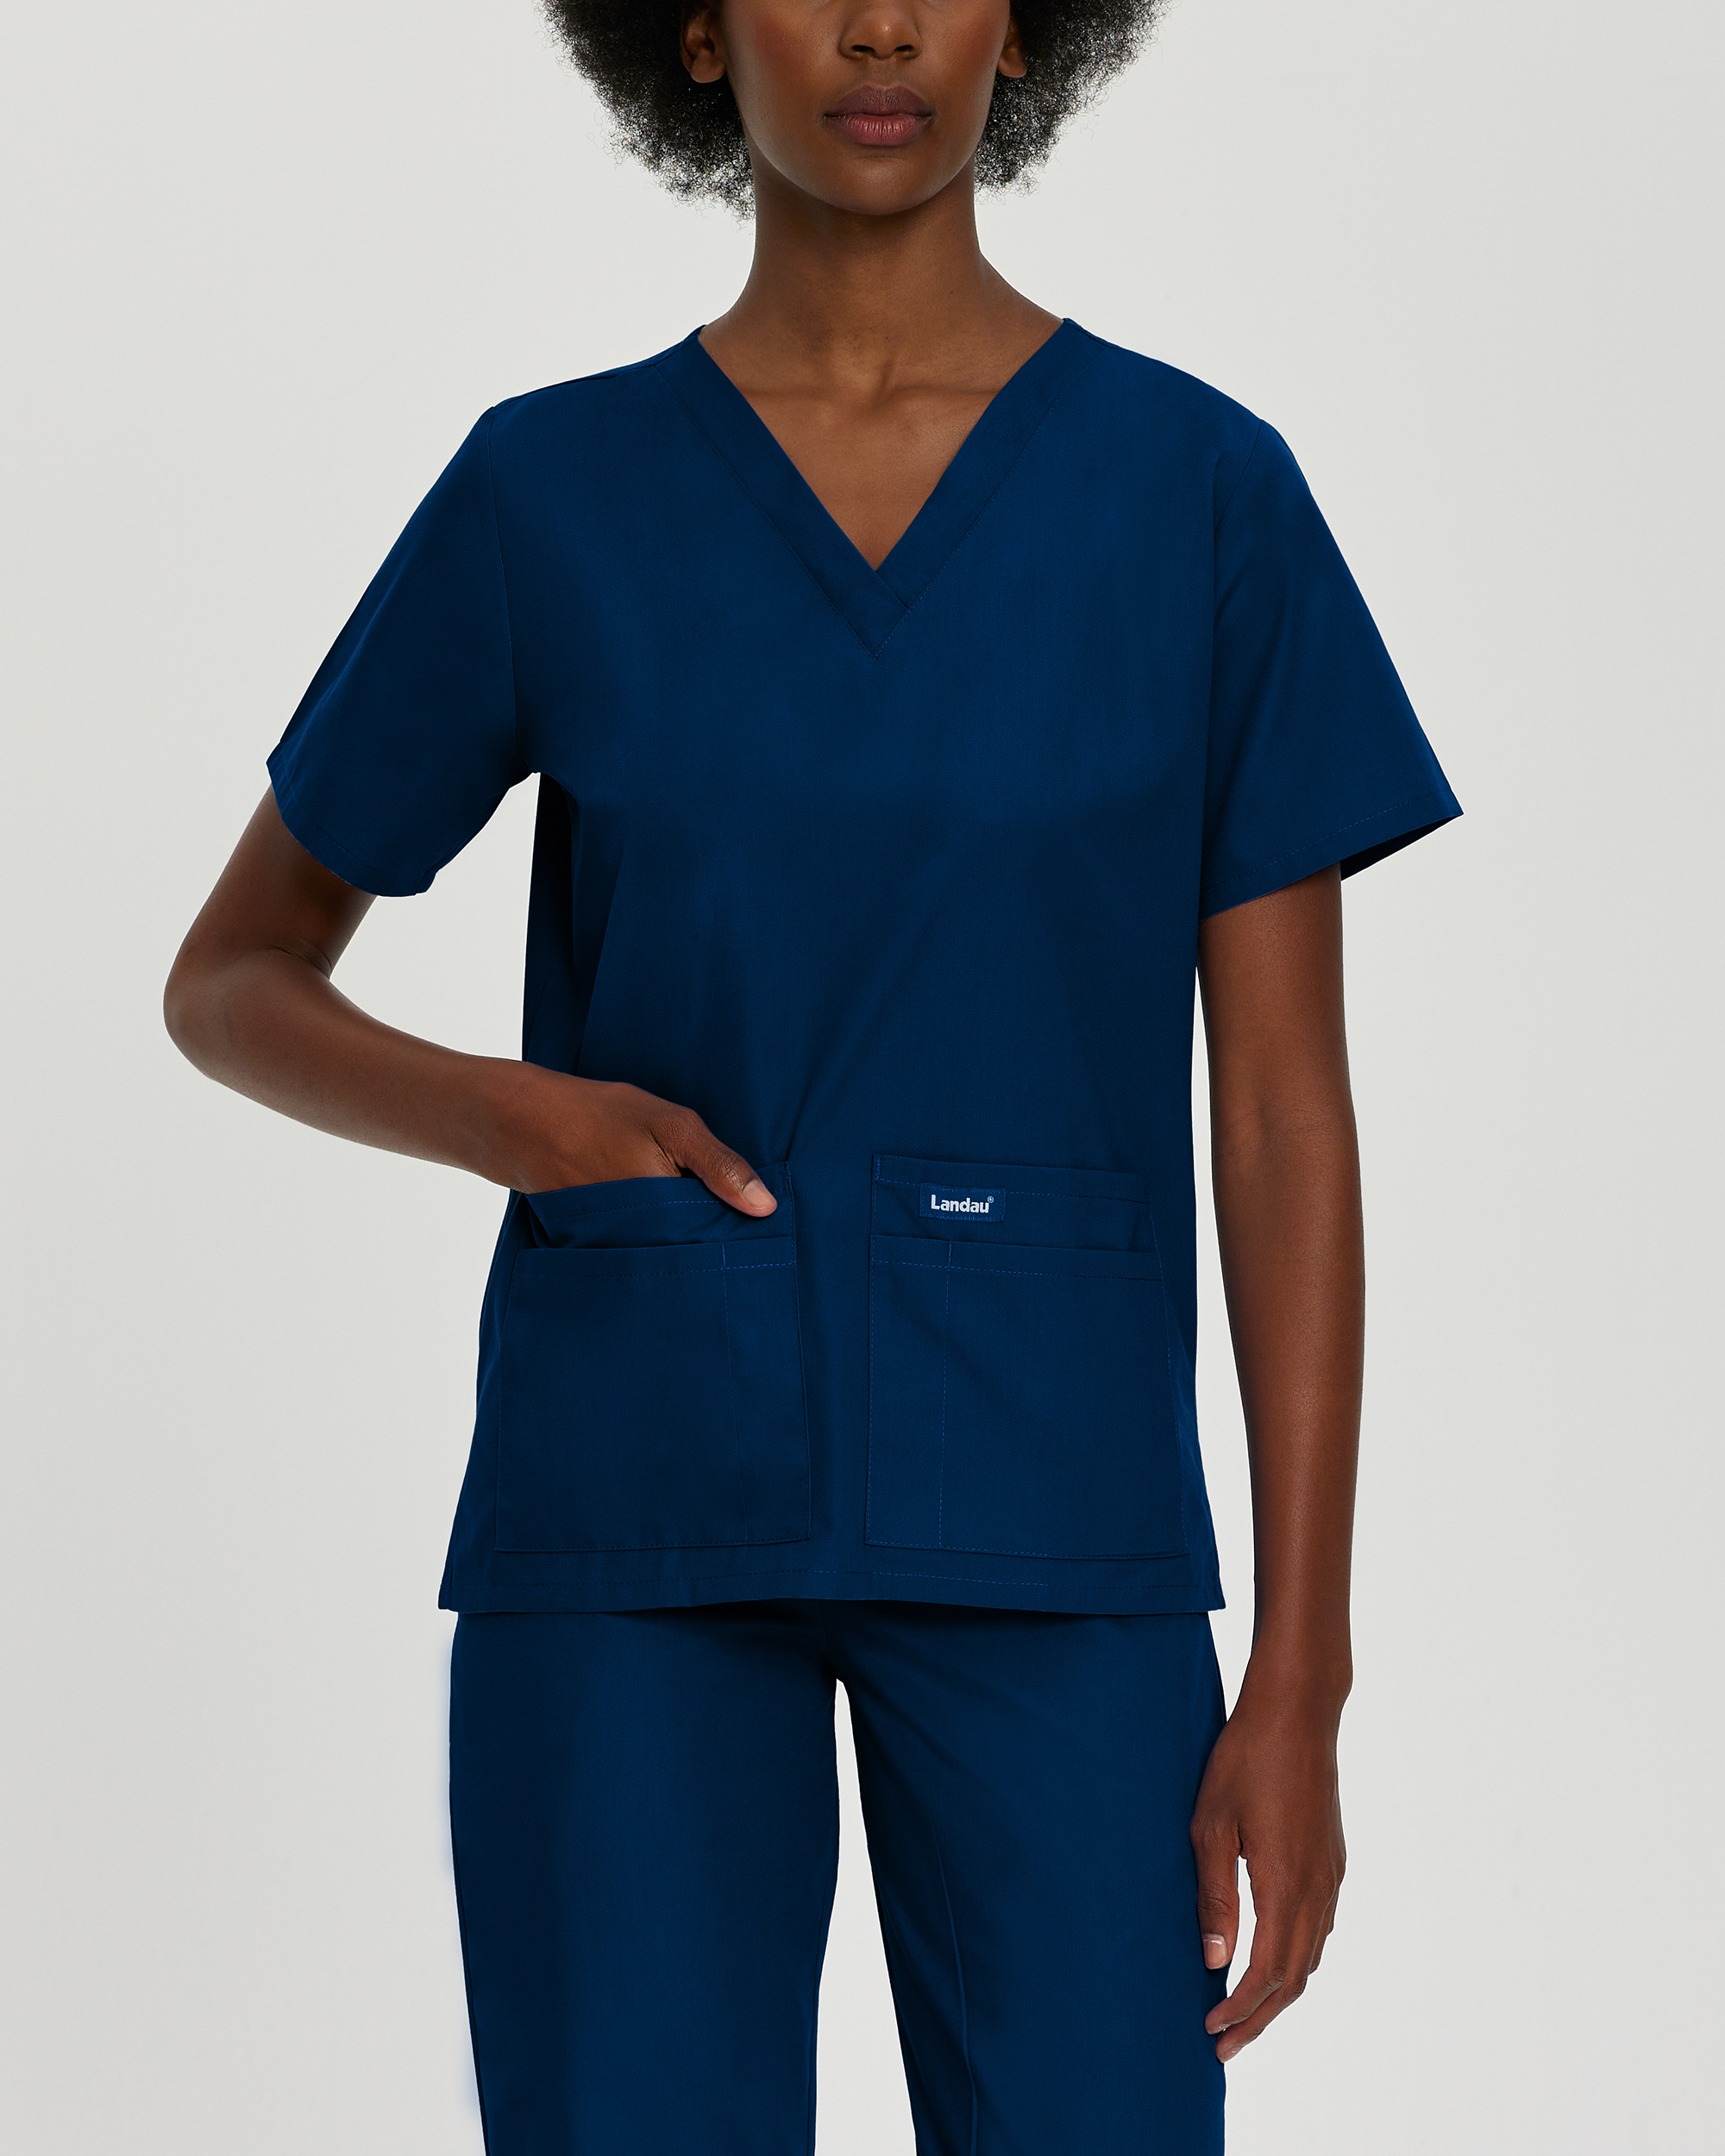 Do Landau scrub tops come in different colors and sizes?